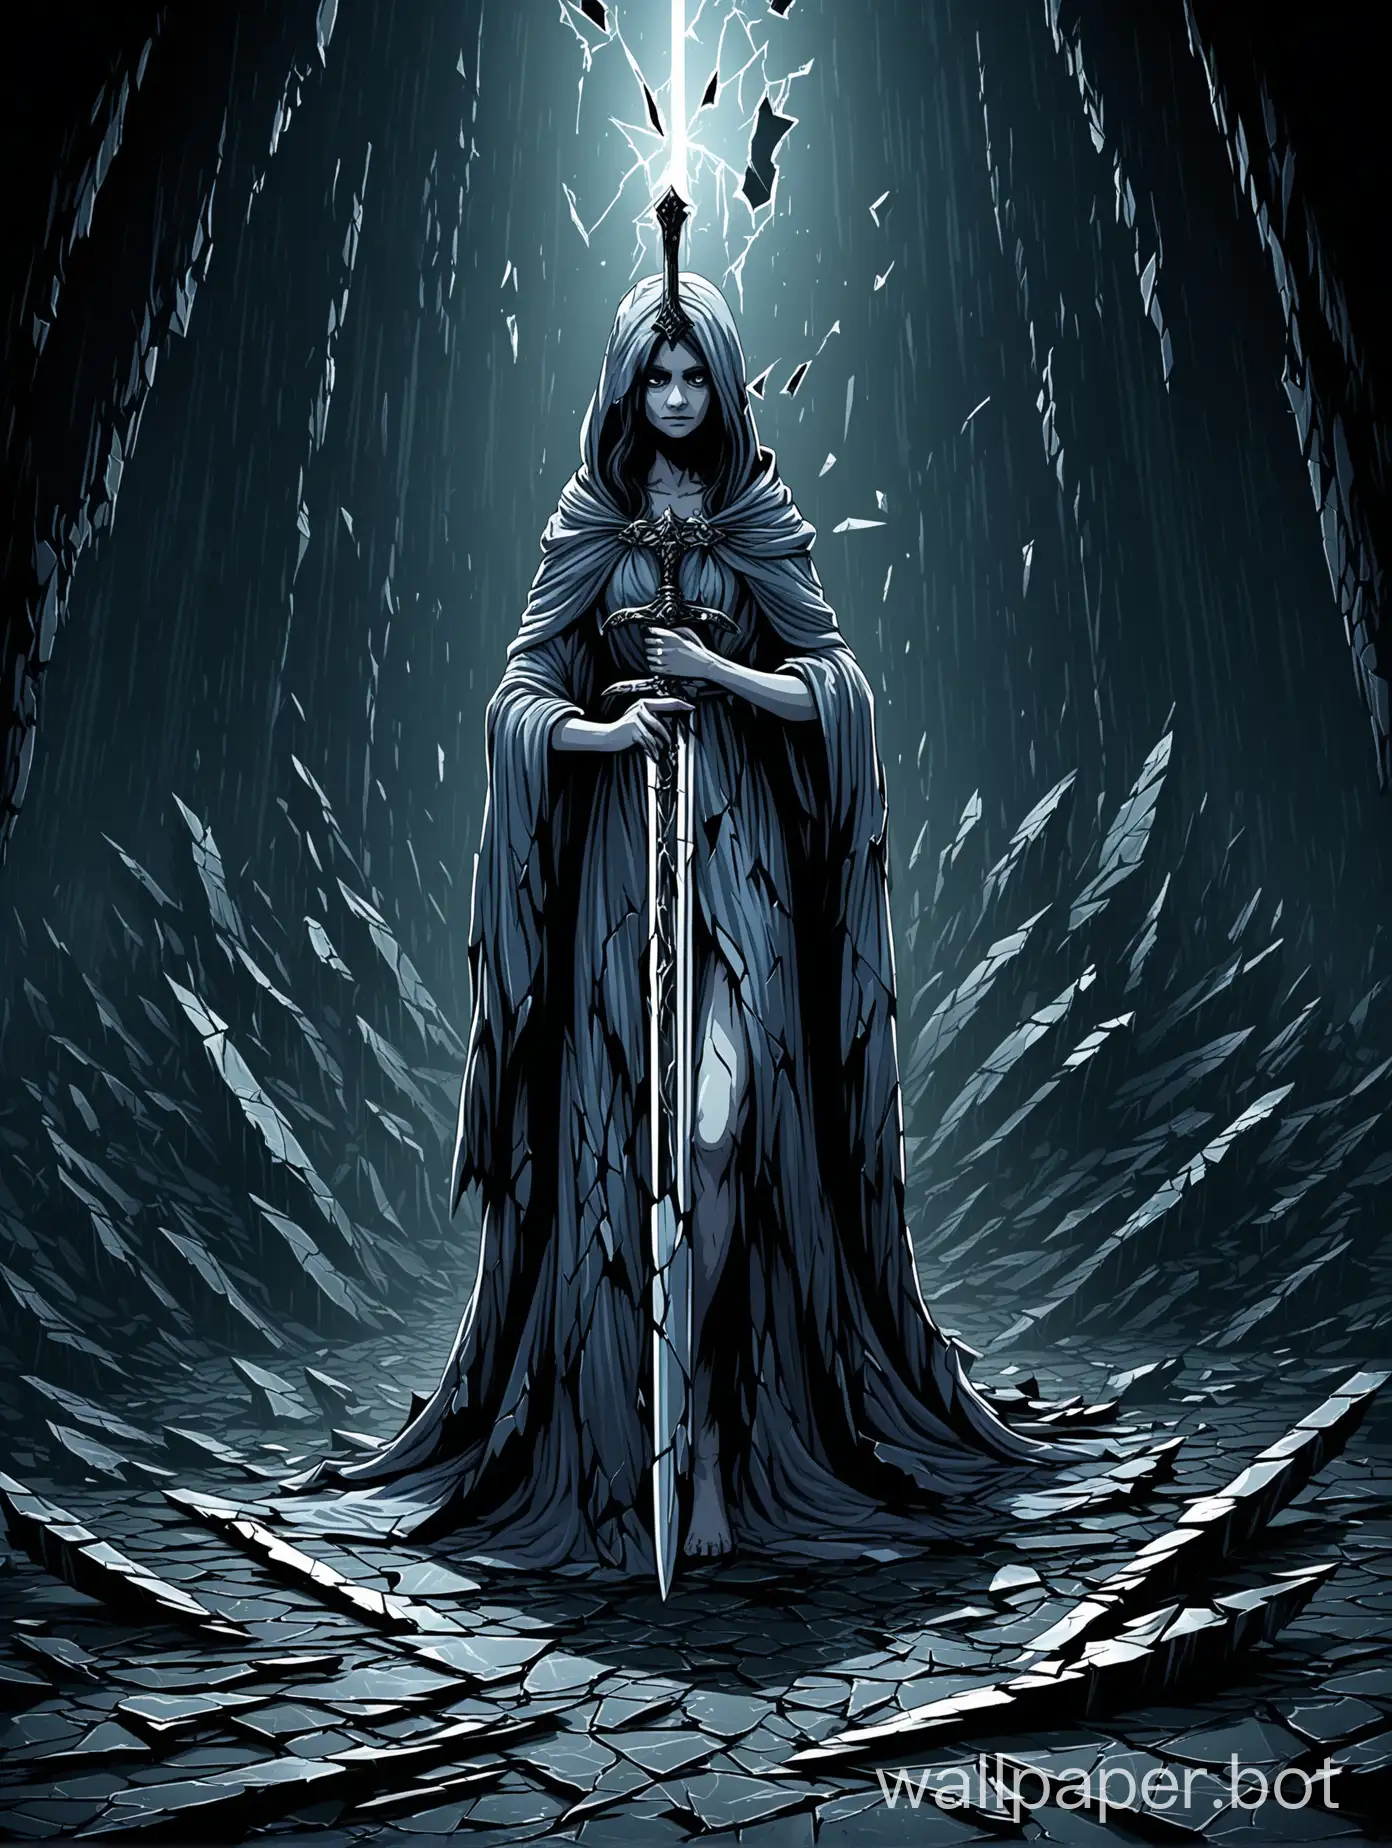 Dark-Fantasy-Vector-Art-Mysterious-Figure-Clutching-a-Tattered-Sword-in-a-Brooding-Atmosphere